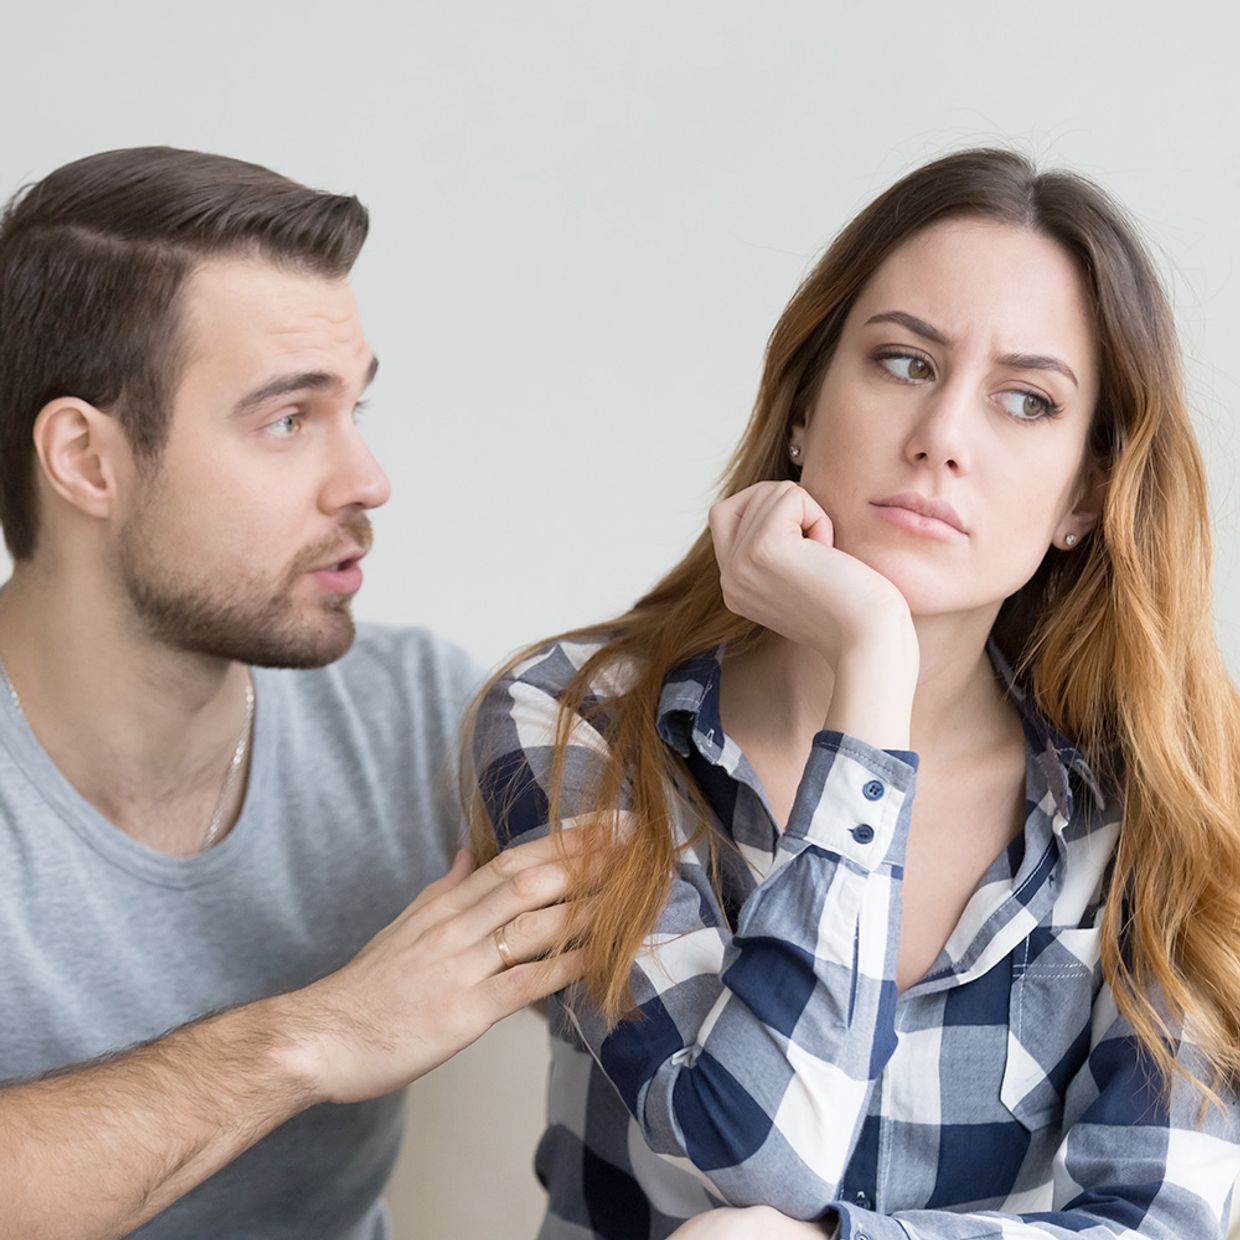 Can Relationship Work Without Trust?